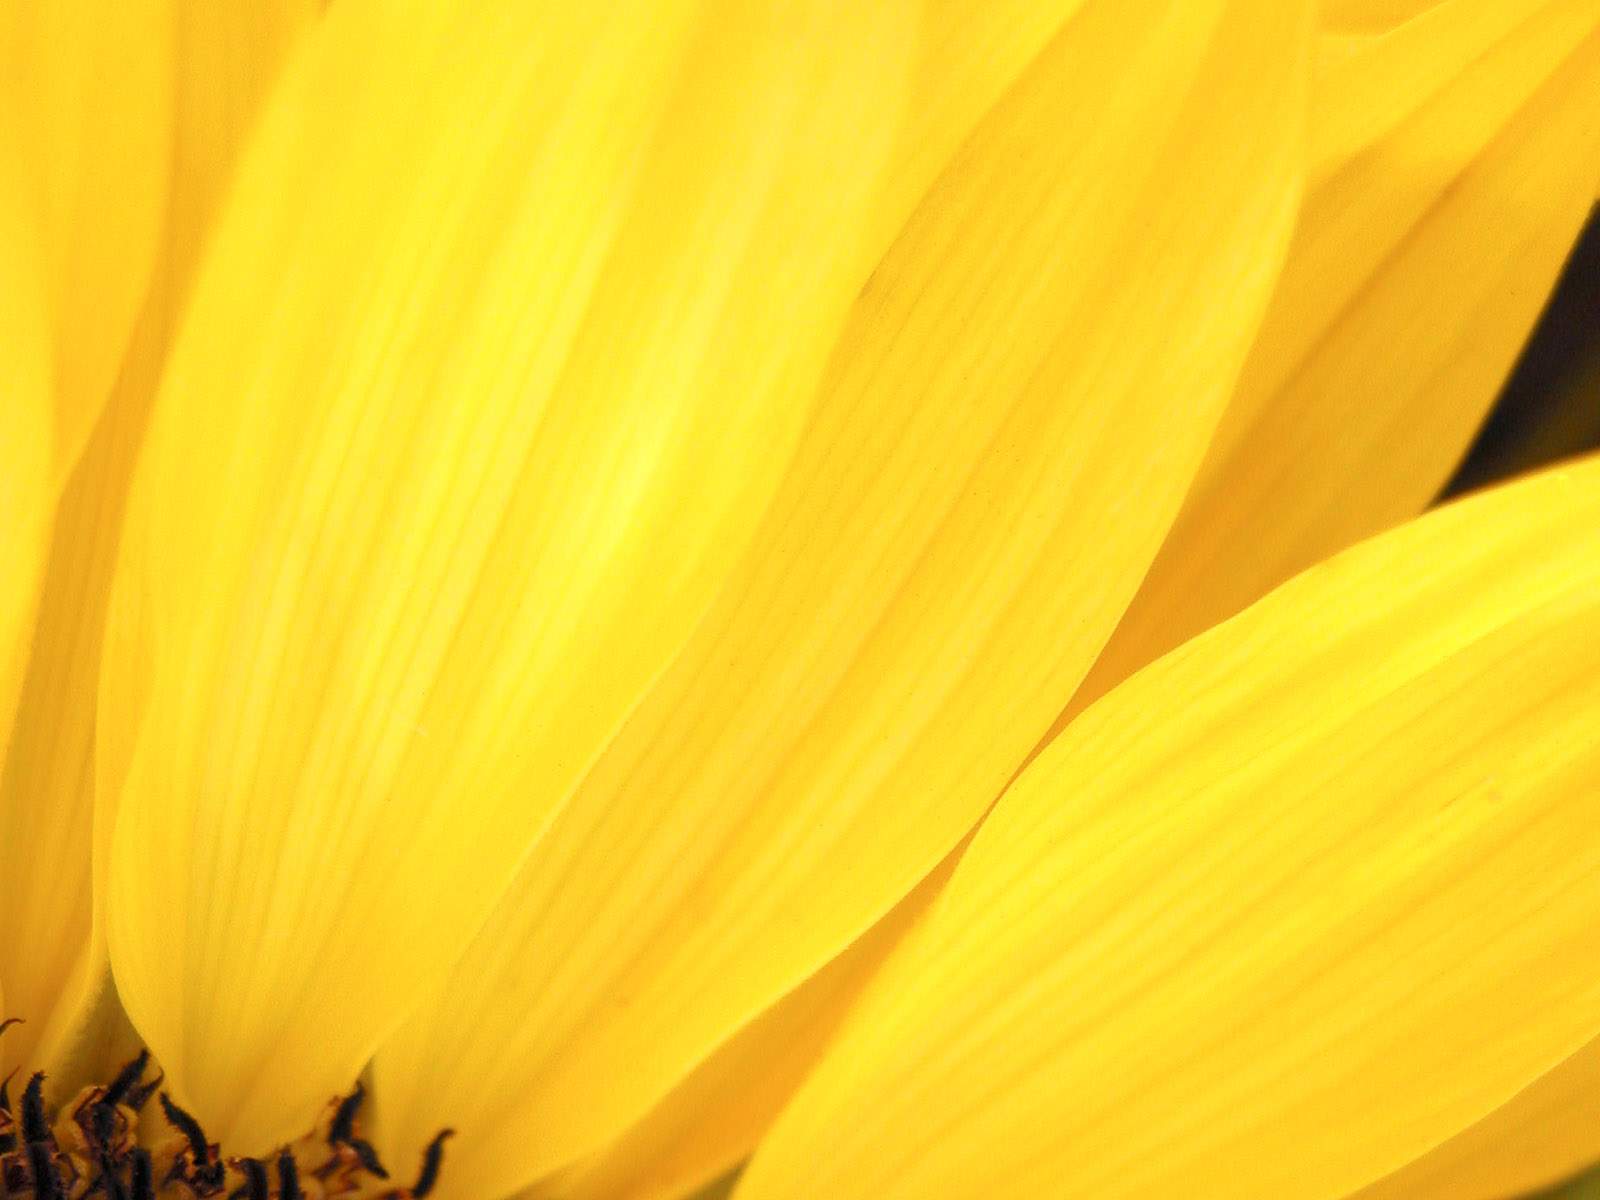  and White Wallpapers Yellow Flower Close up Photo   Yellow Wallpaper